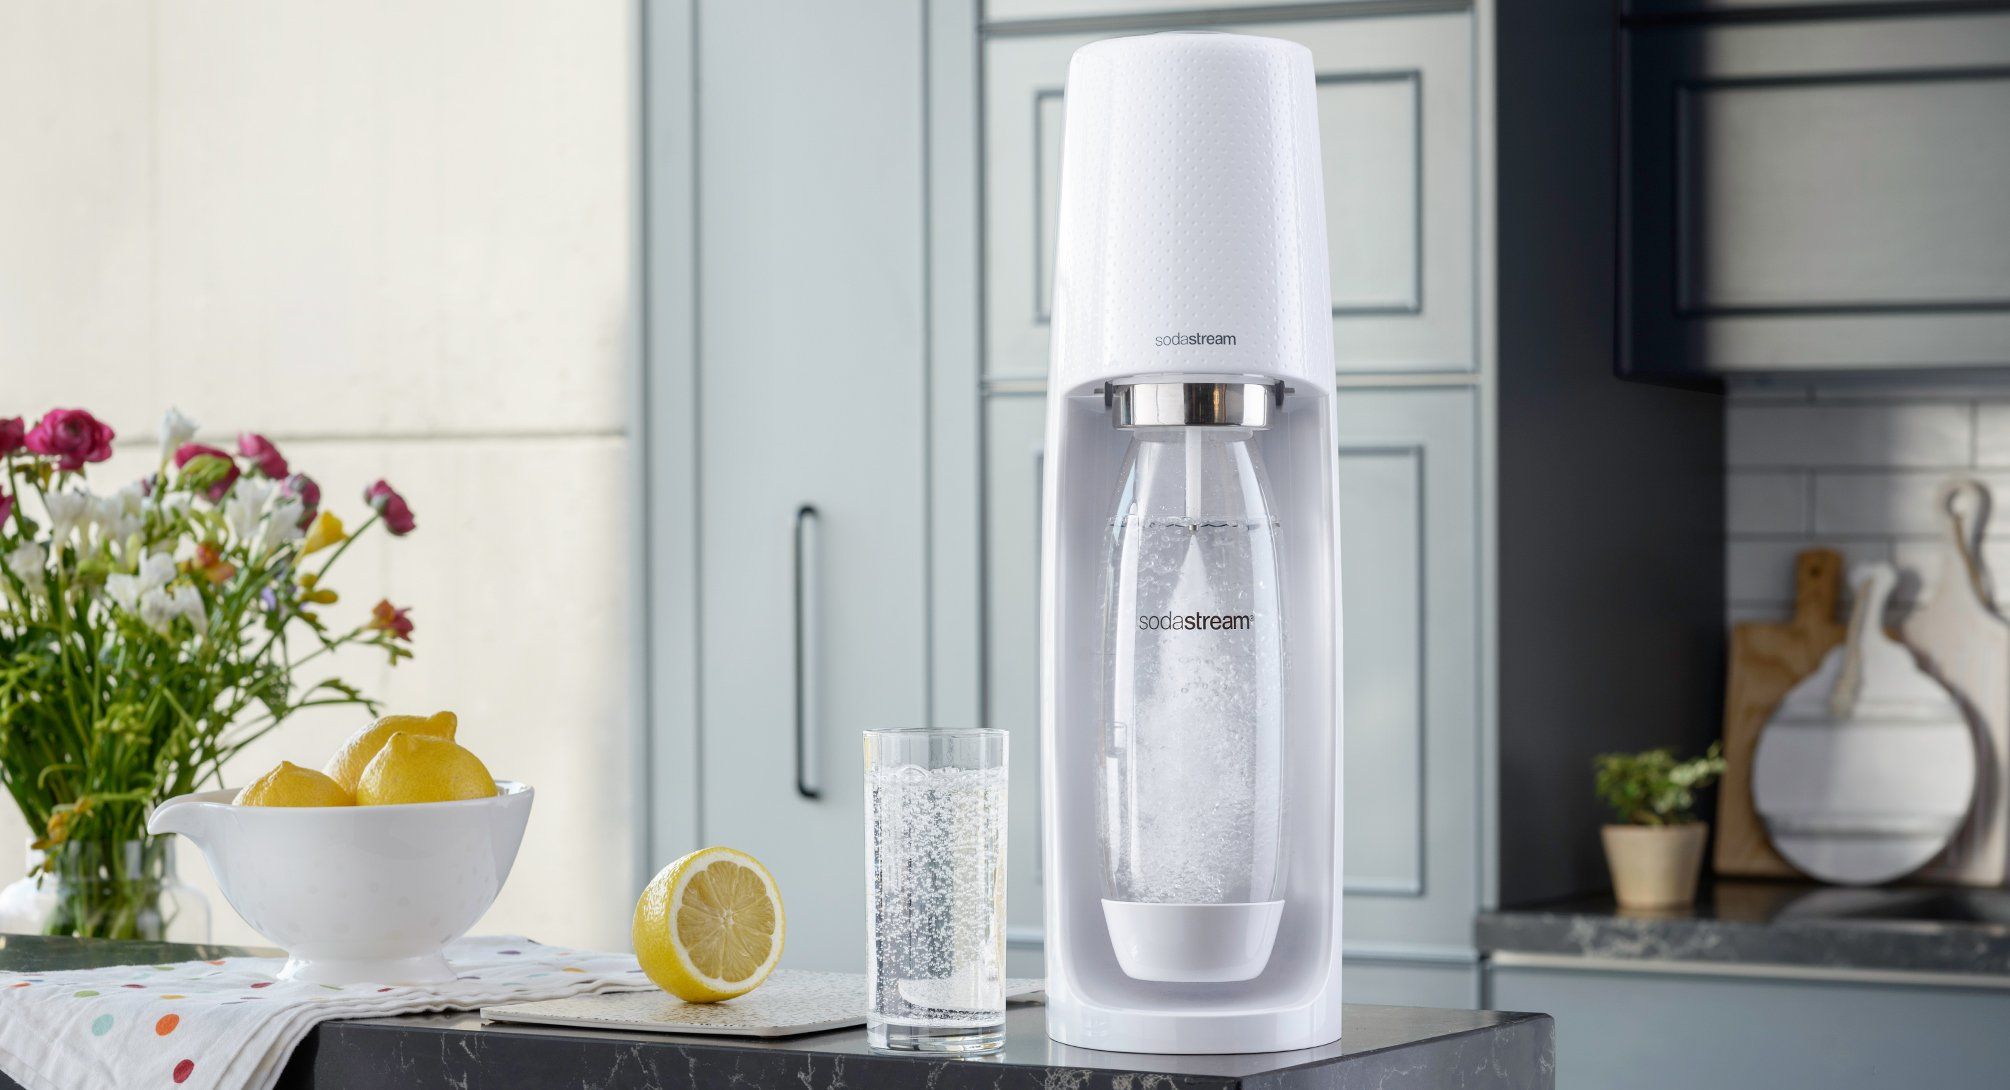 About SodaStream